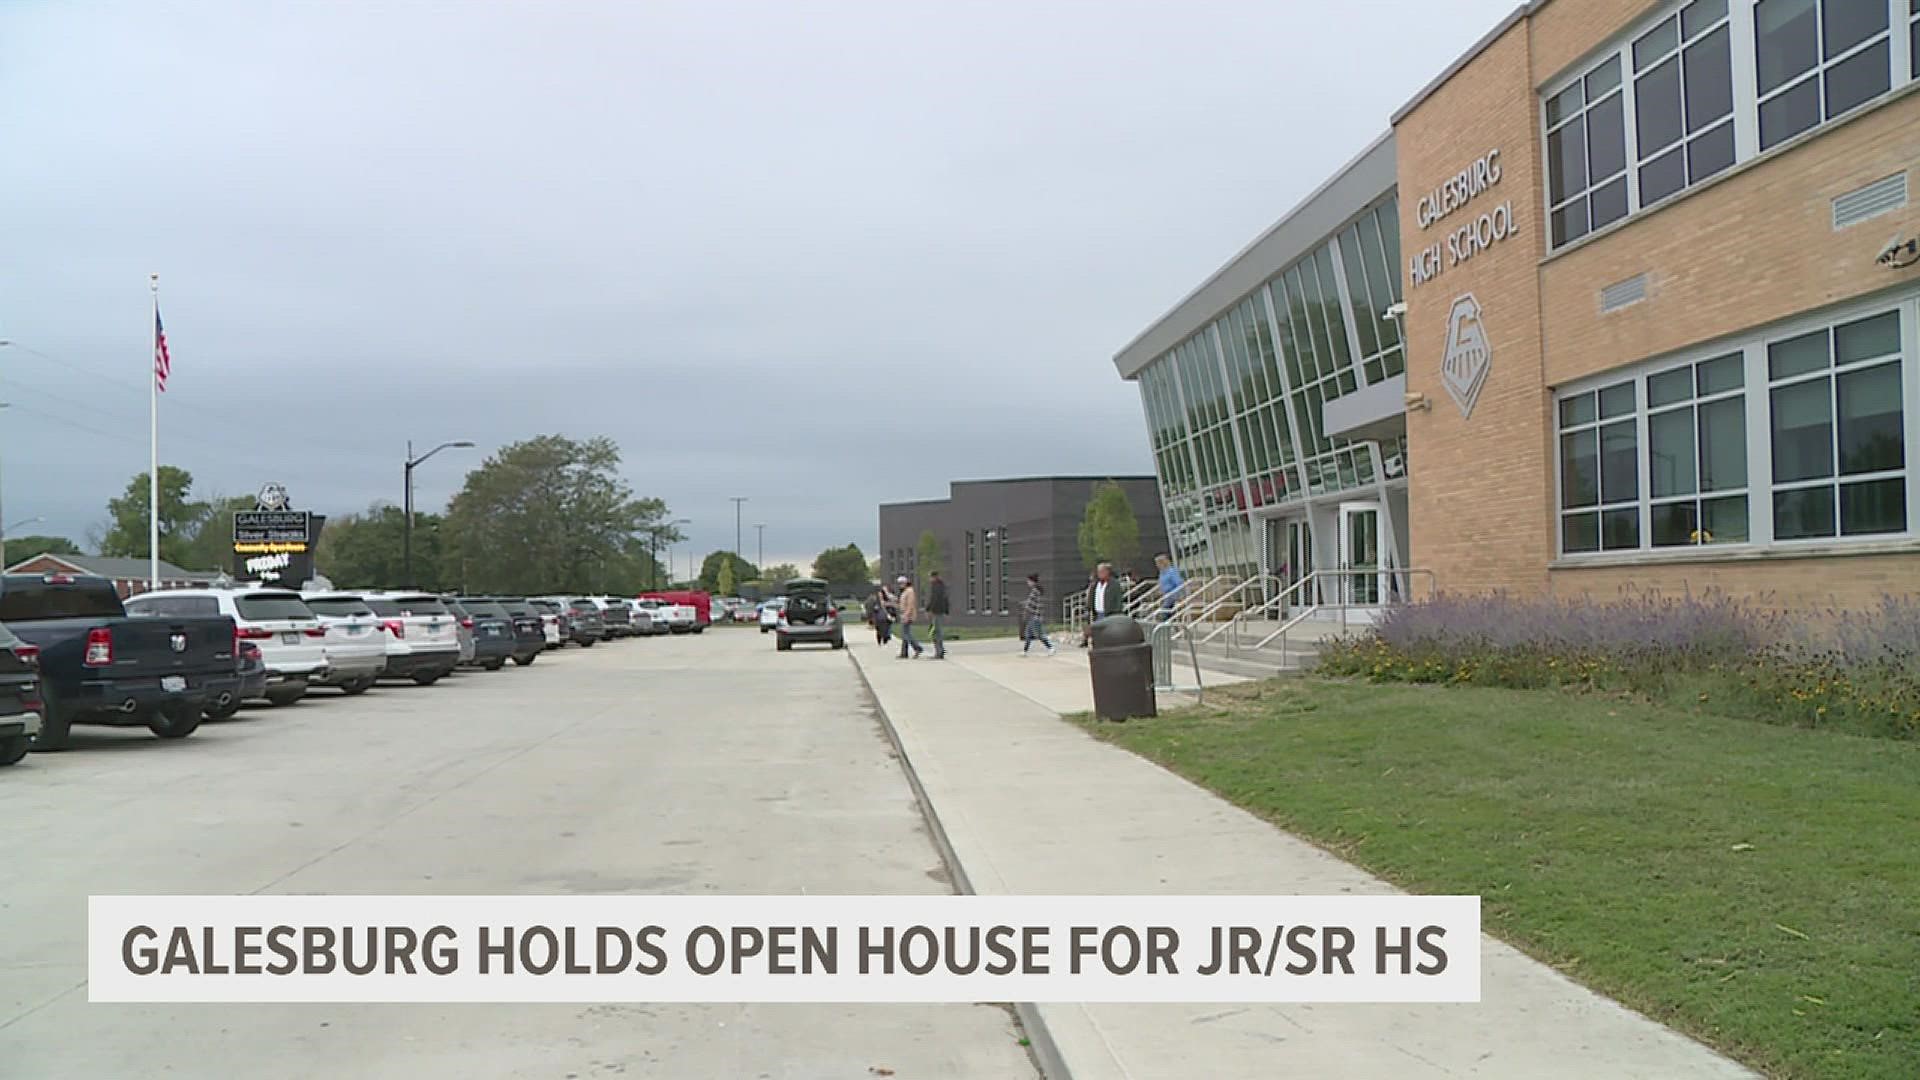 The renovations included more than 40 million dollars for additional classrooms, updates to its performing arts center and full air conditioning in the building.